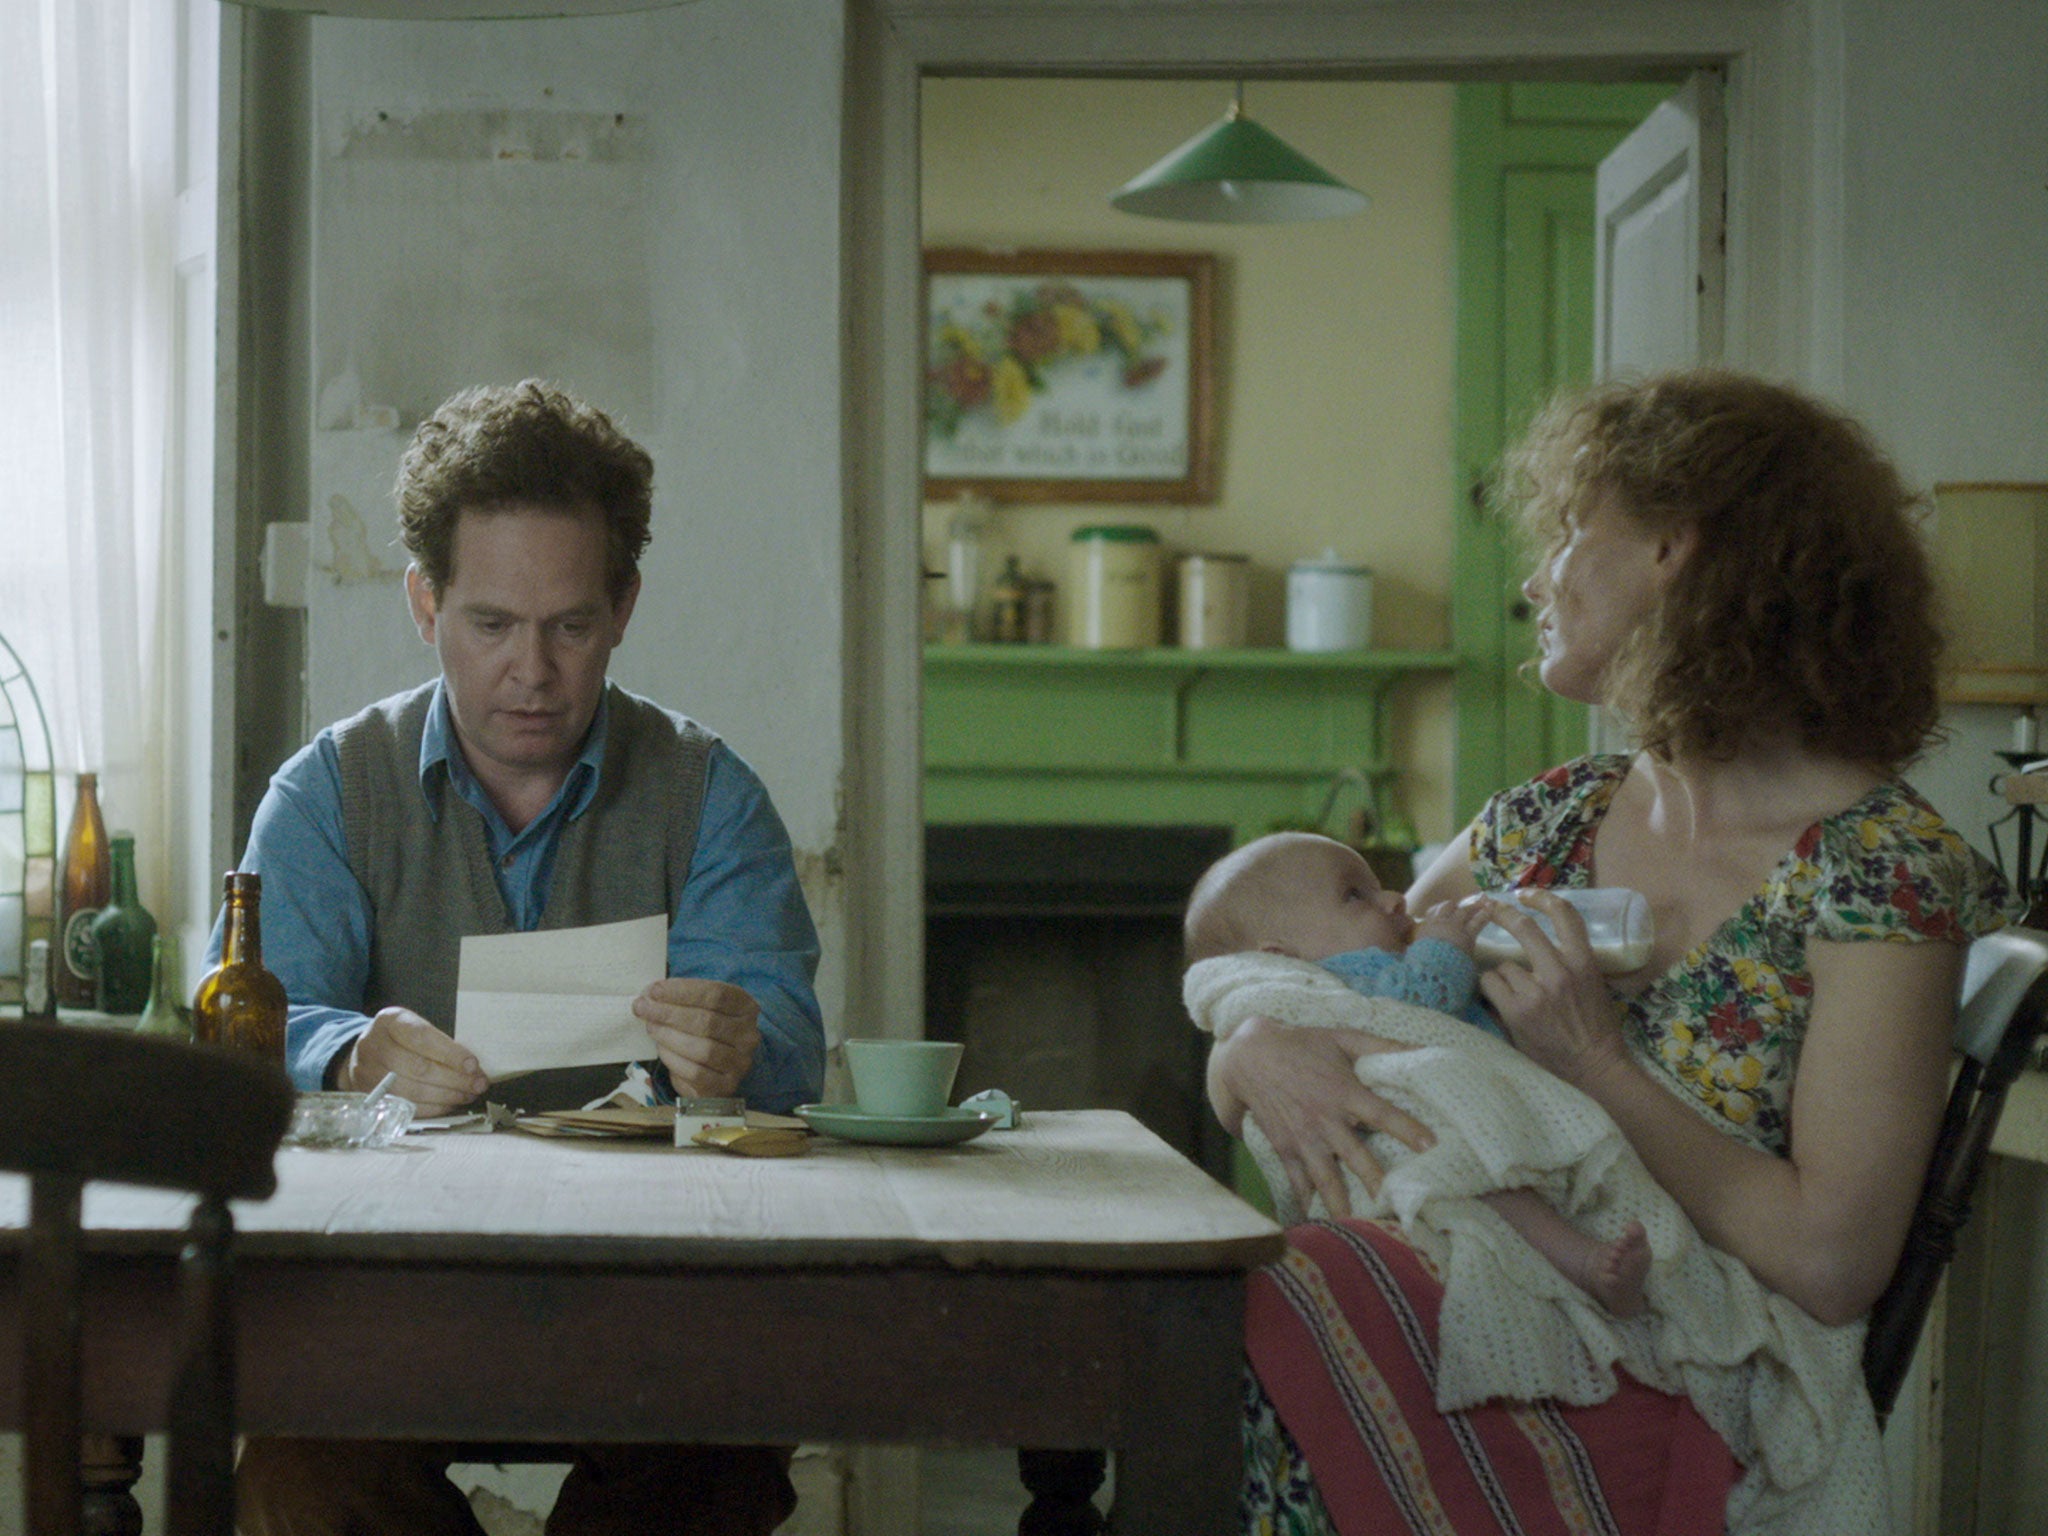 The physical demands on Tom Hollander as Dylan Thomas doesn’t help reveal the artists inner life